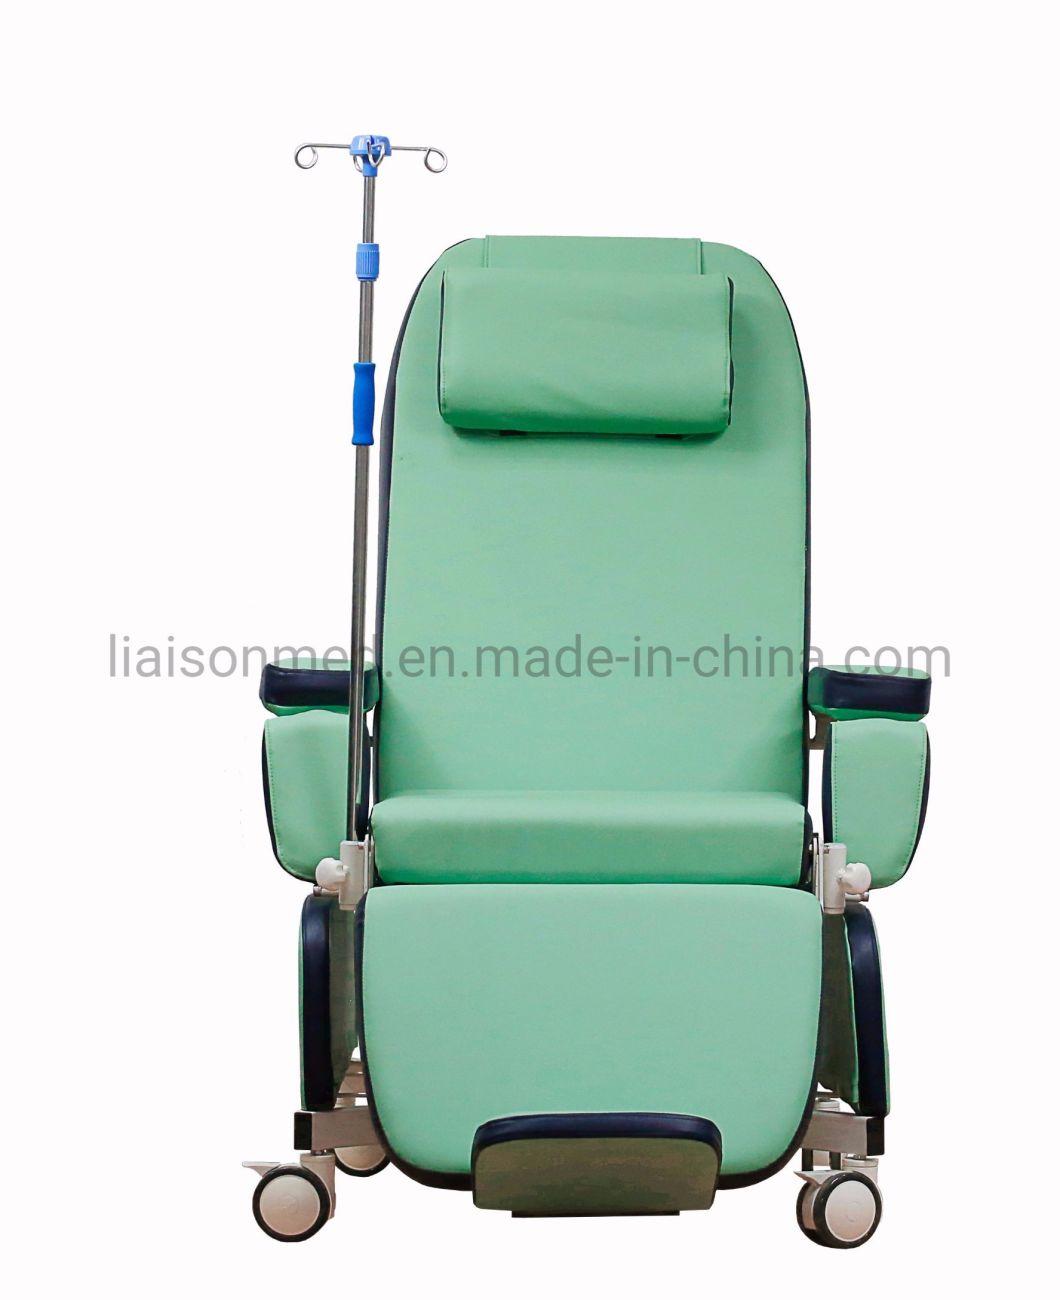 Mn-Bdc002 Hospital Chemotherapy Chair Electric Blood Dialysis Treatment Chair